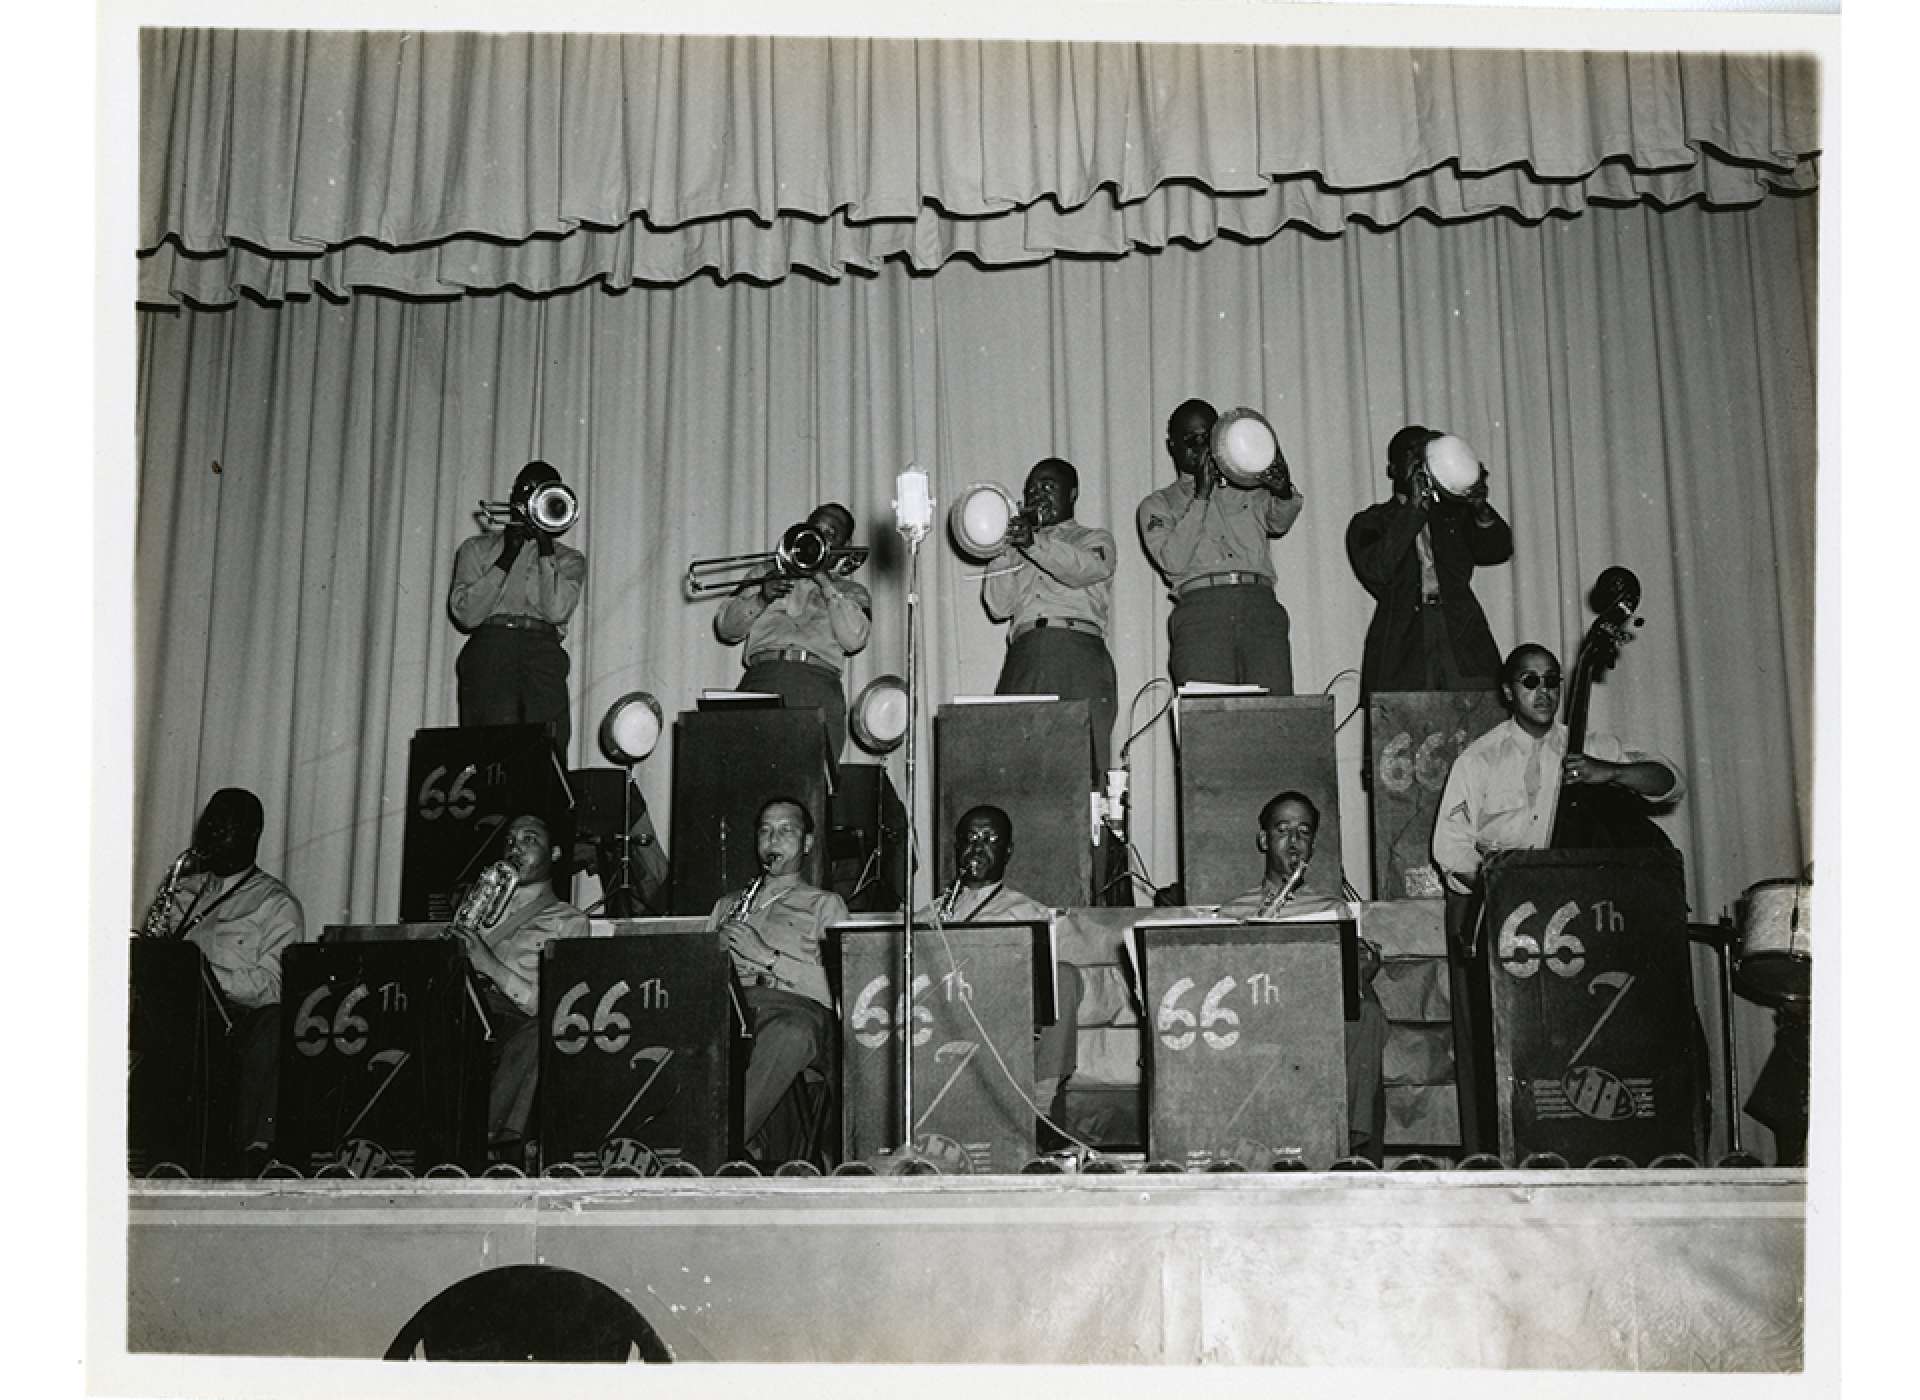 Members of the 66th M. T. B. playing at the Abilene, Texas, Air Force Base. Credit: Gift of Maxwell Garret, Accession Number: 2009.353.003 from the Collection of the National World War II Museum. 